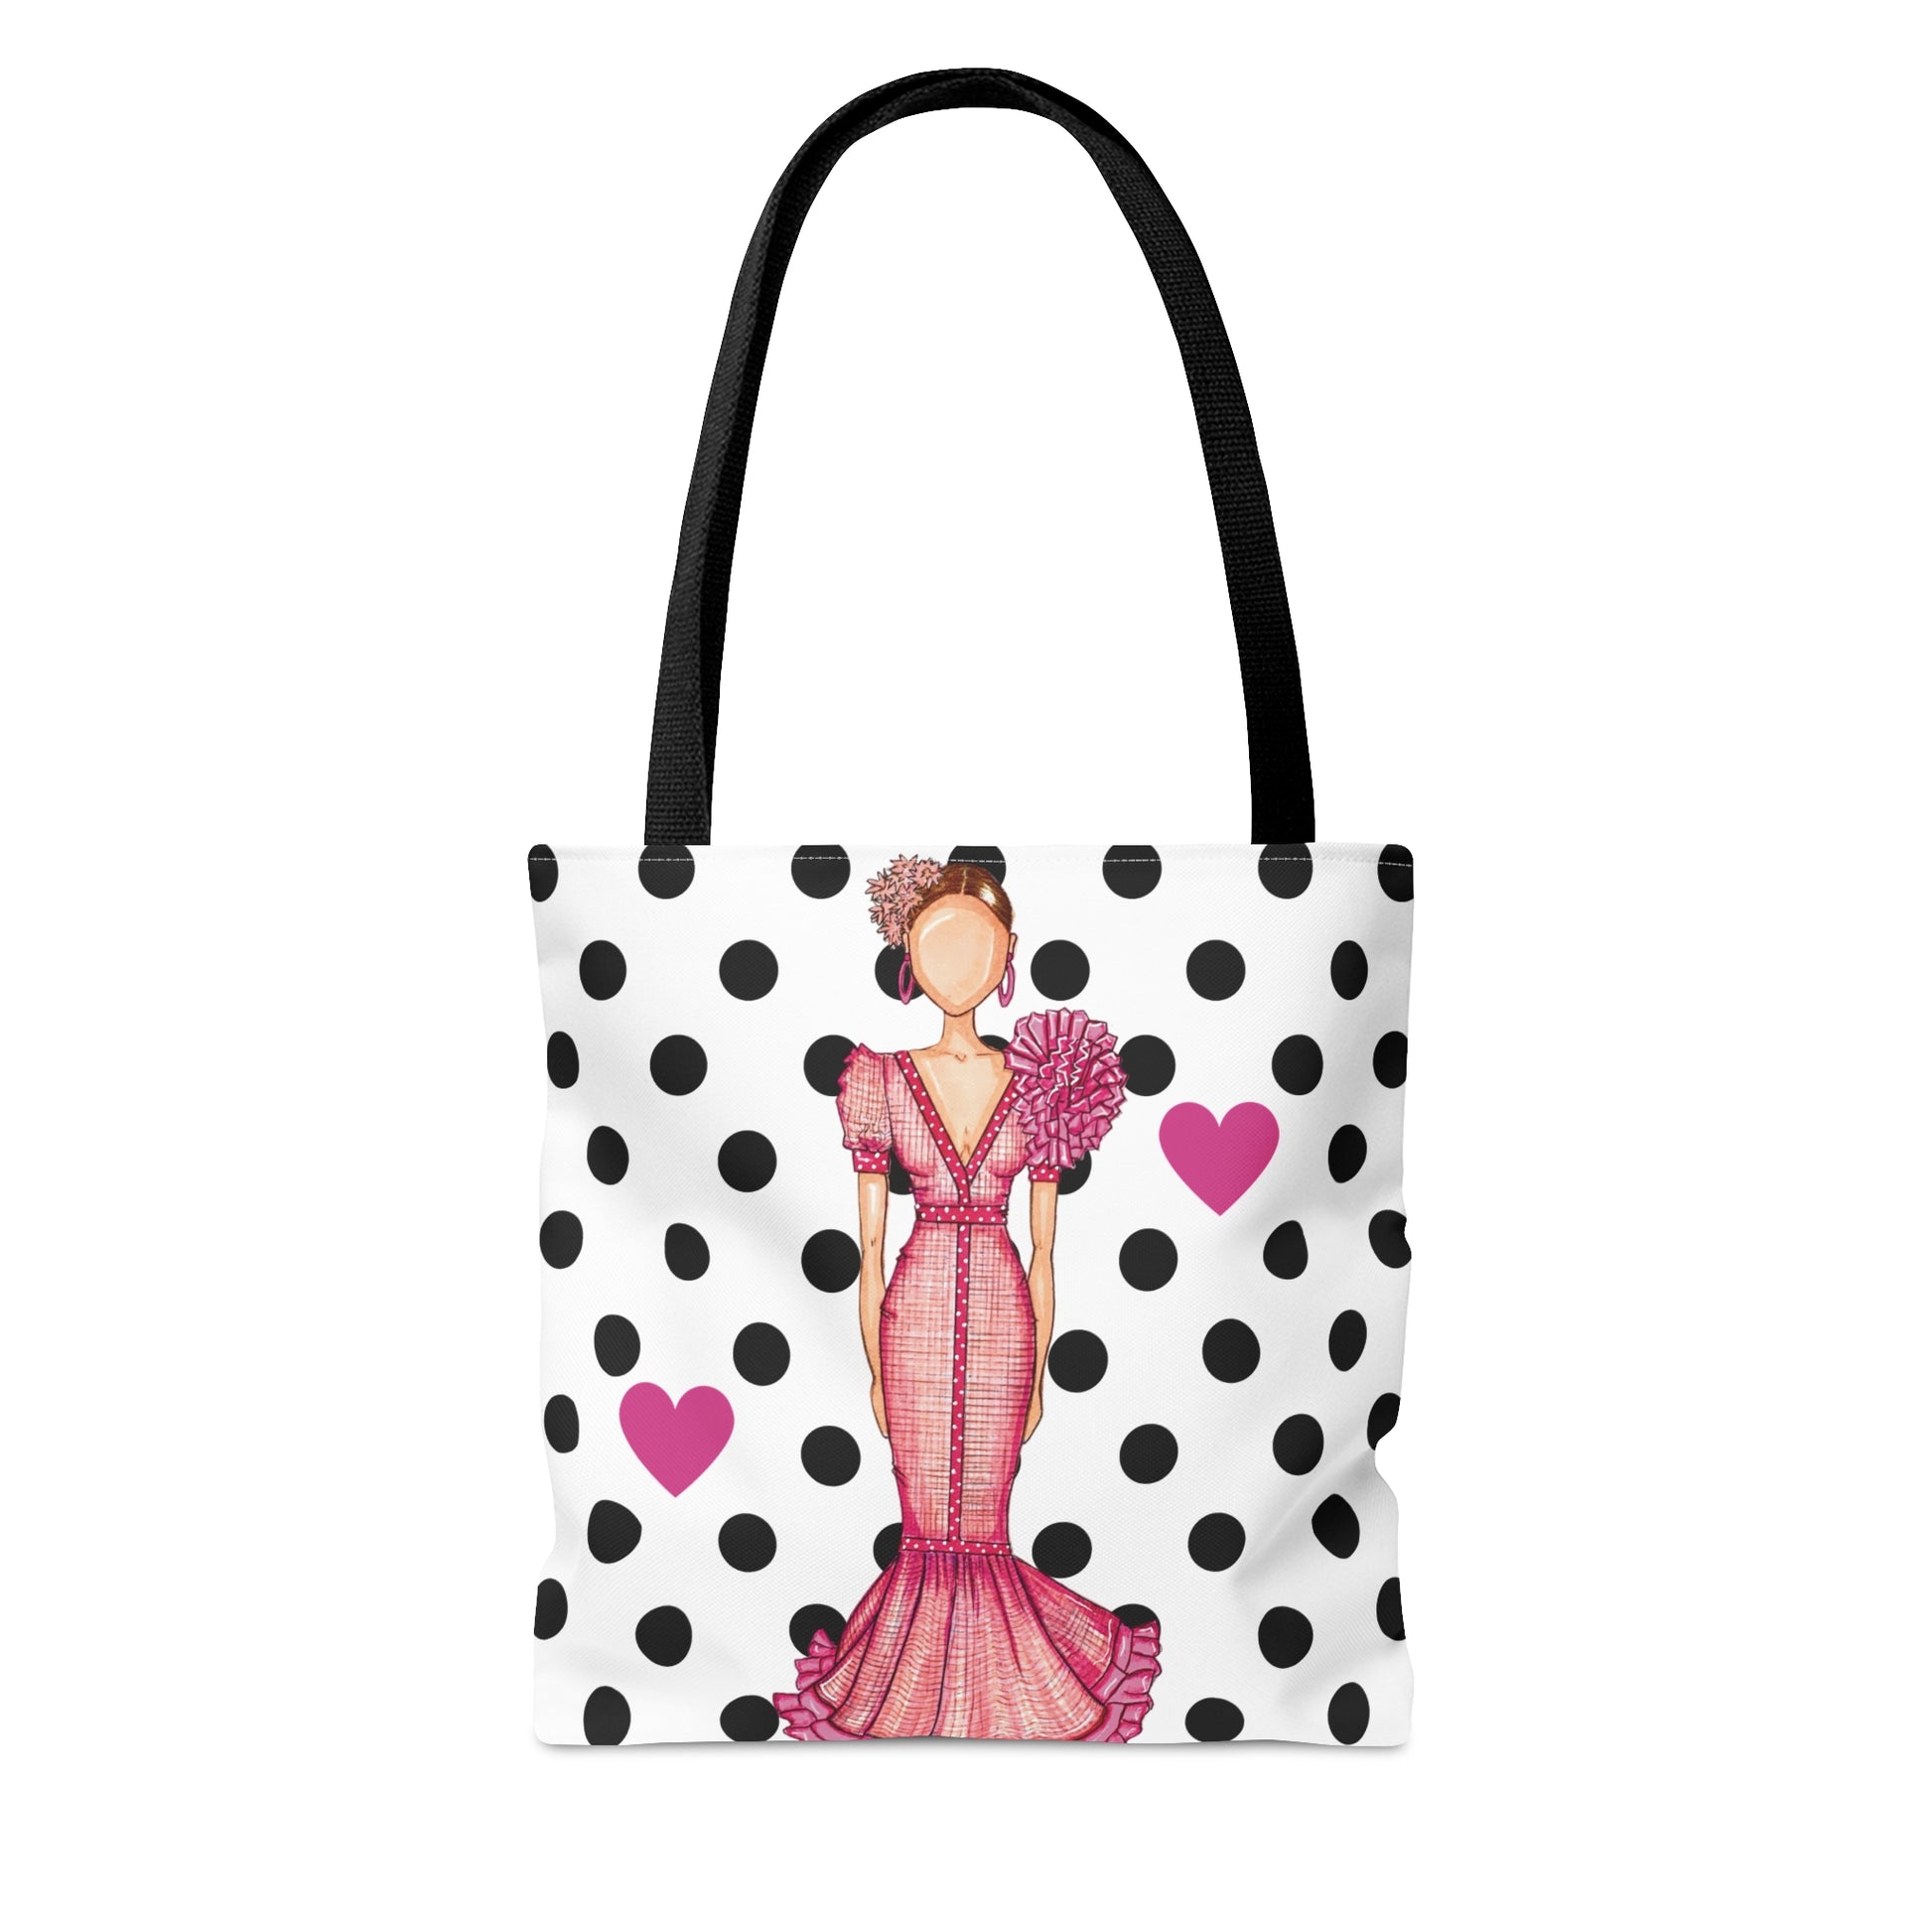 a polka dot bag with a woman in a pink dress